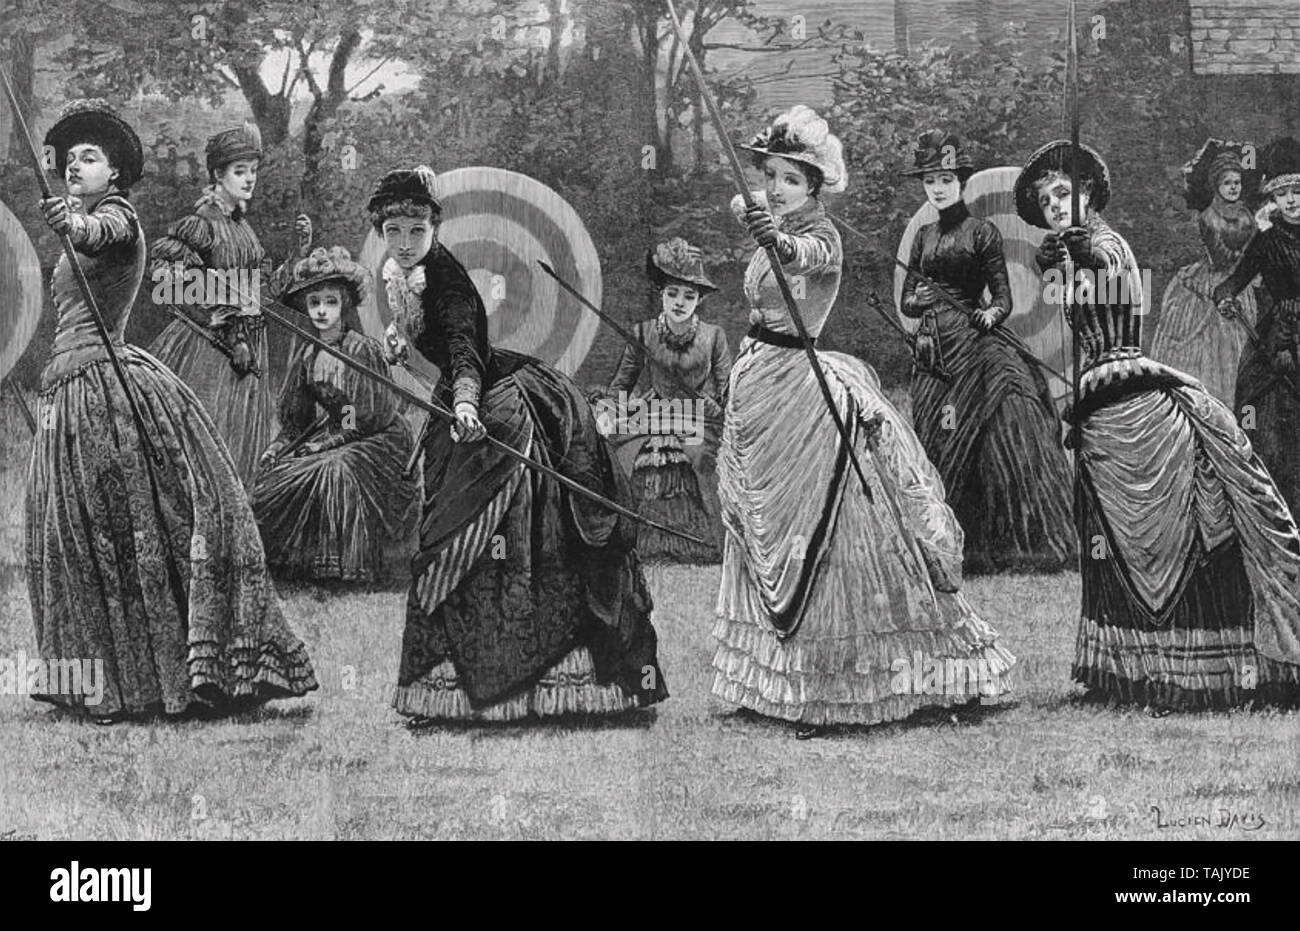 WOMENS ARCHERY COMPETITION about 1880 Stock Photo